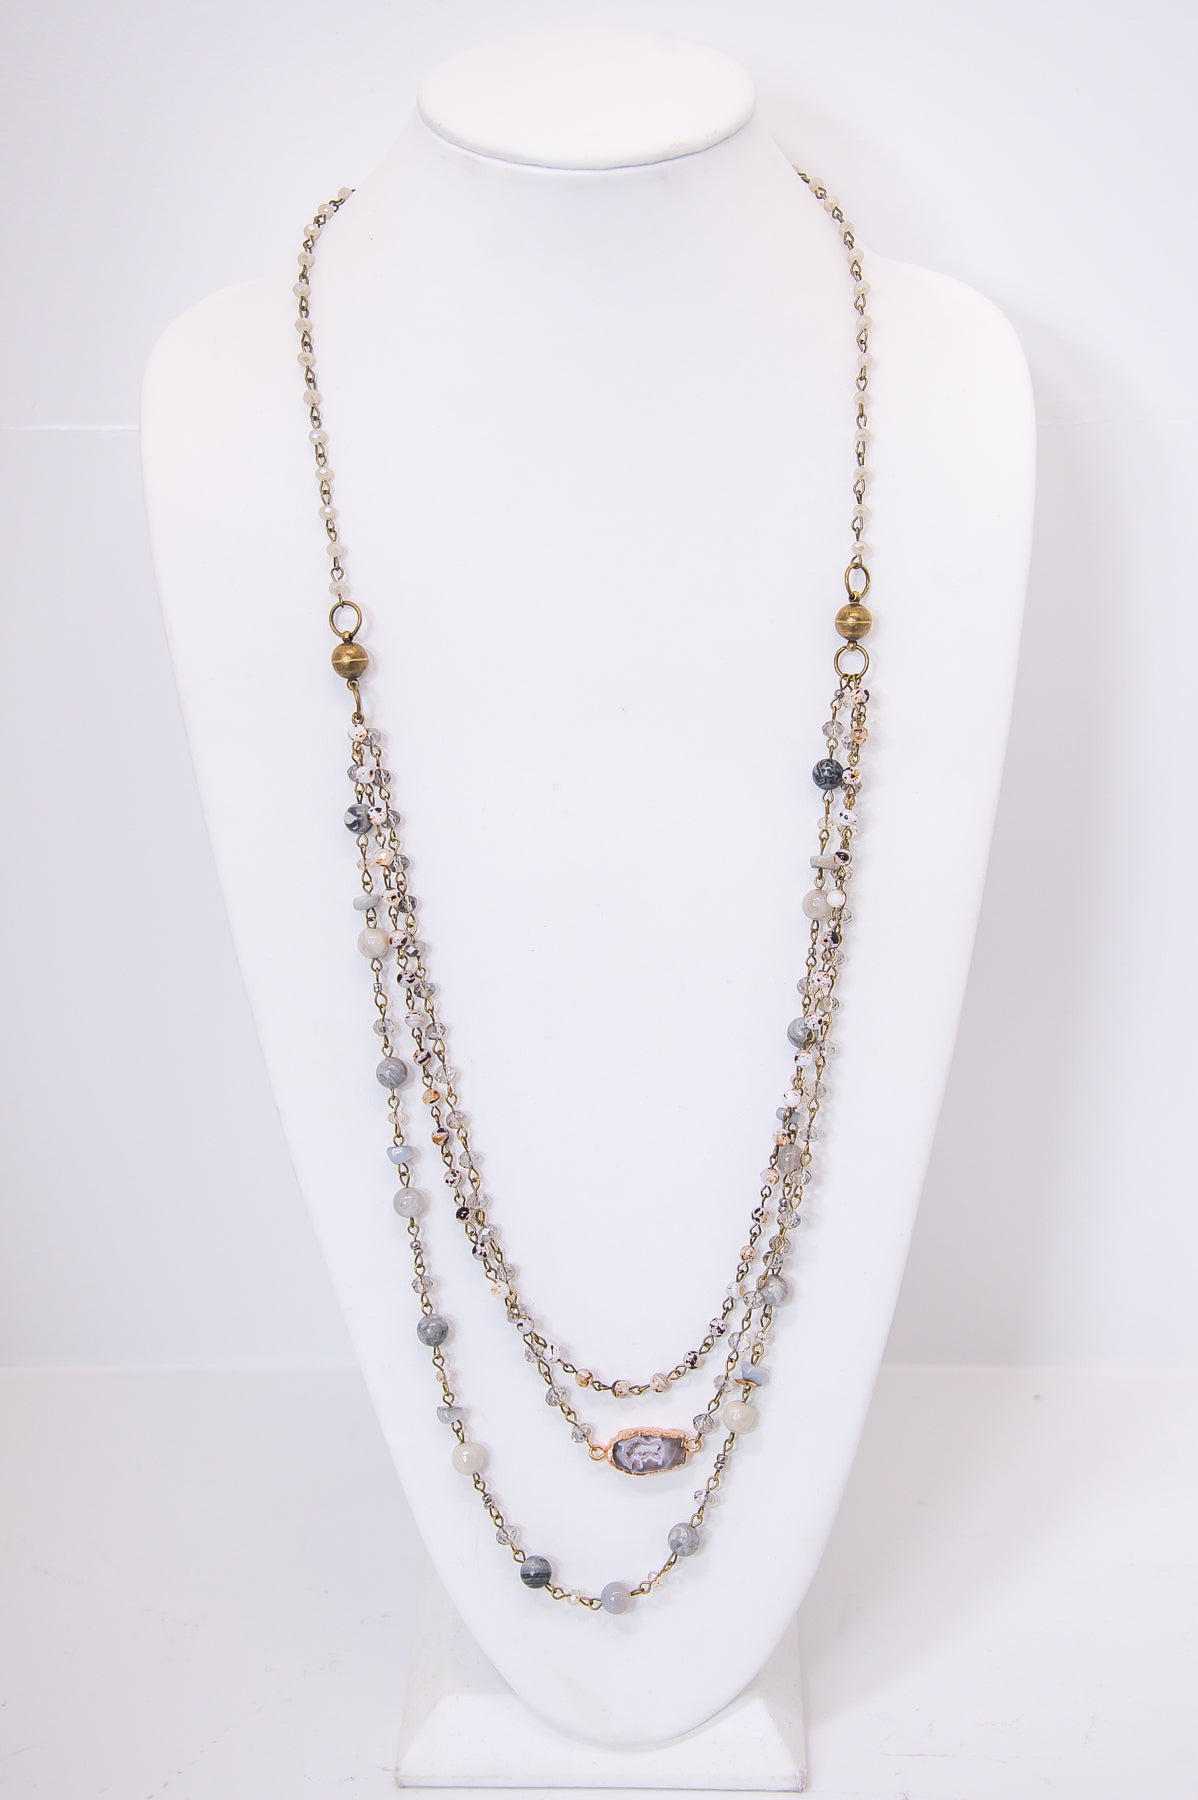 Gray/Multi Color Layered Bead Necklace - NEK4273GR